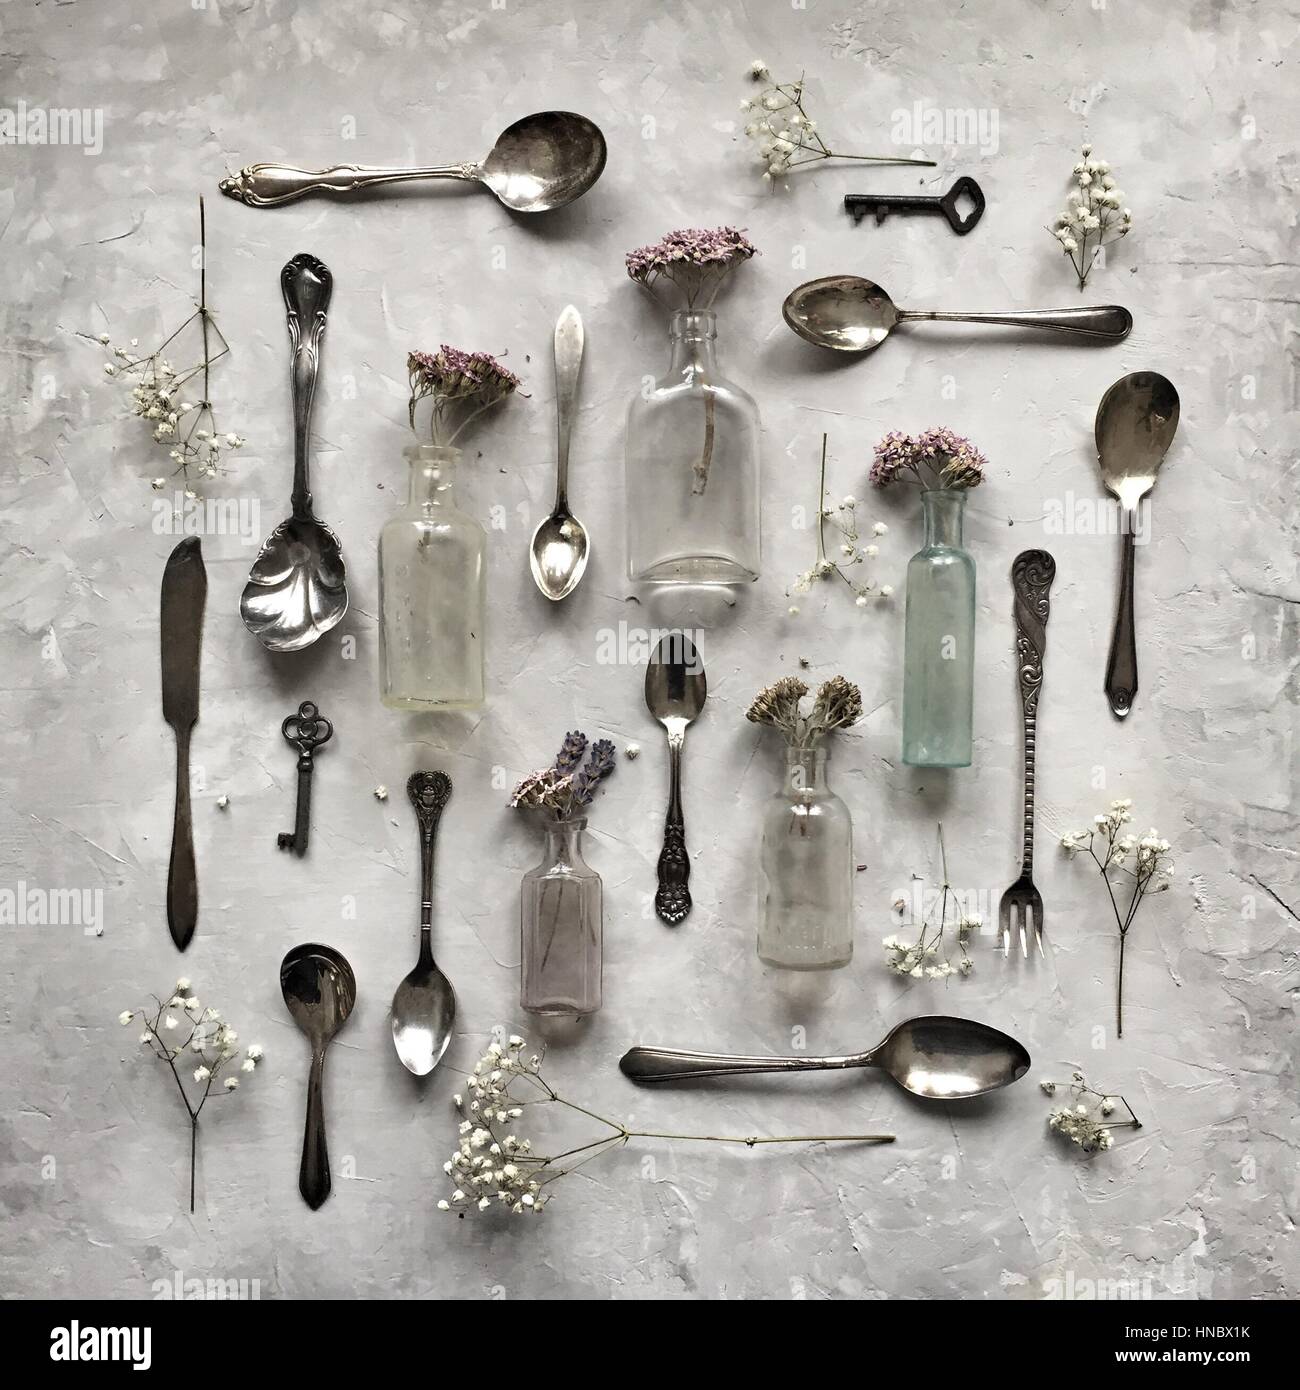 Silver spoons, vintage bottles and dried flowers Stock Photo